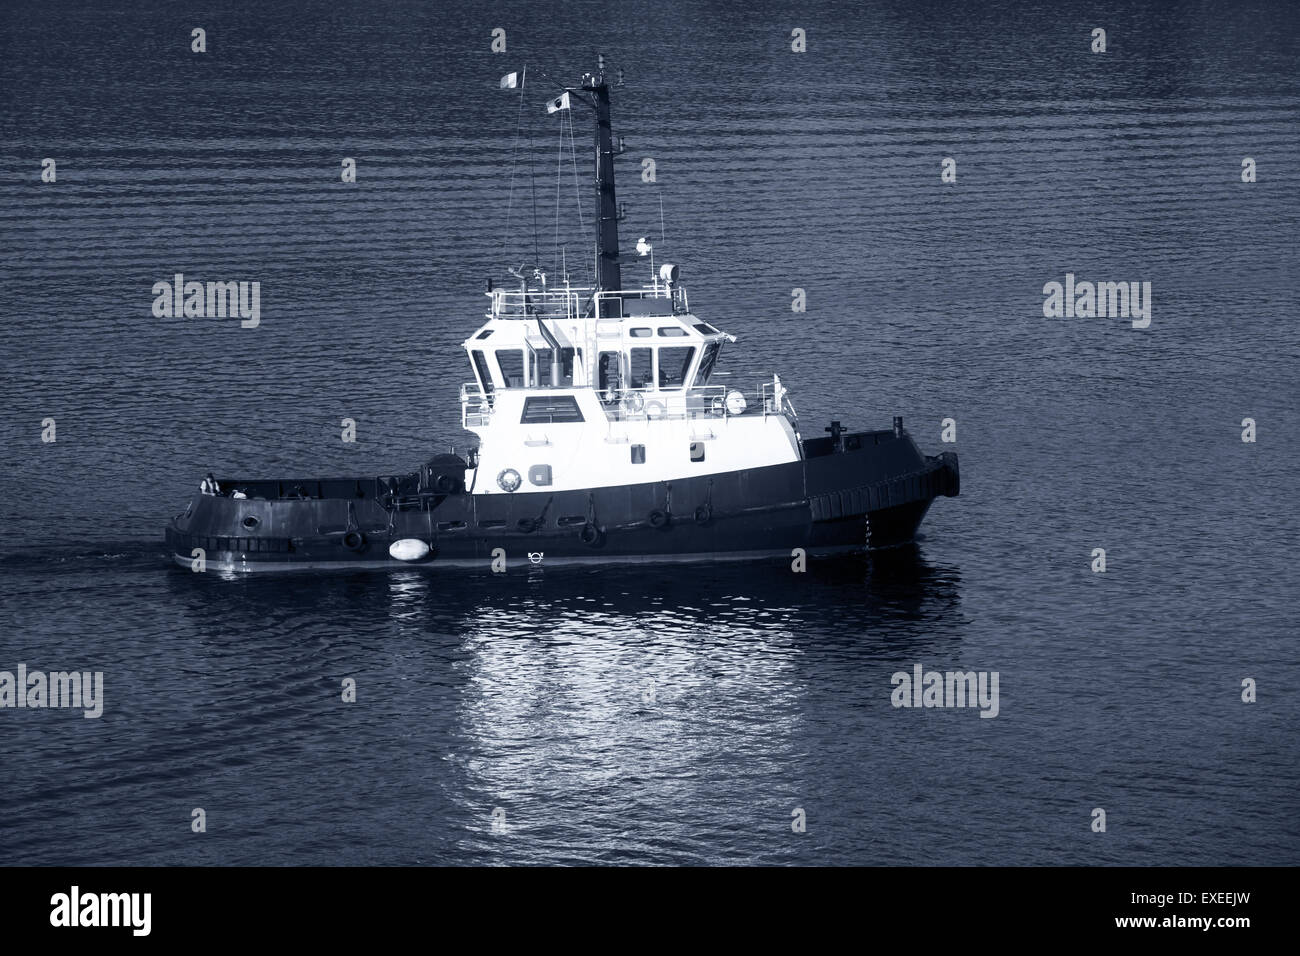 Tug boat with white superstructure underway, side view, monochrome photo Stock Photo